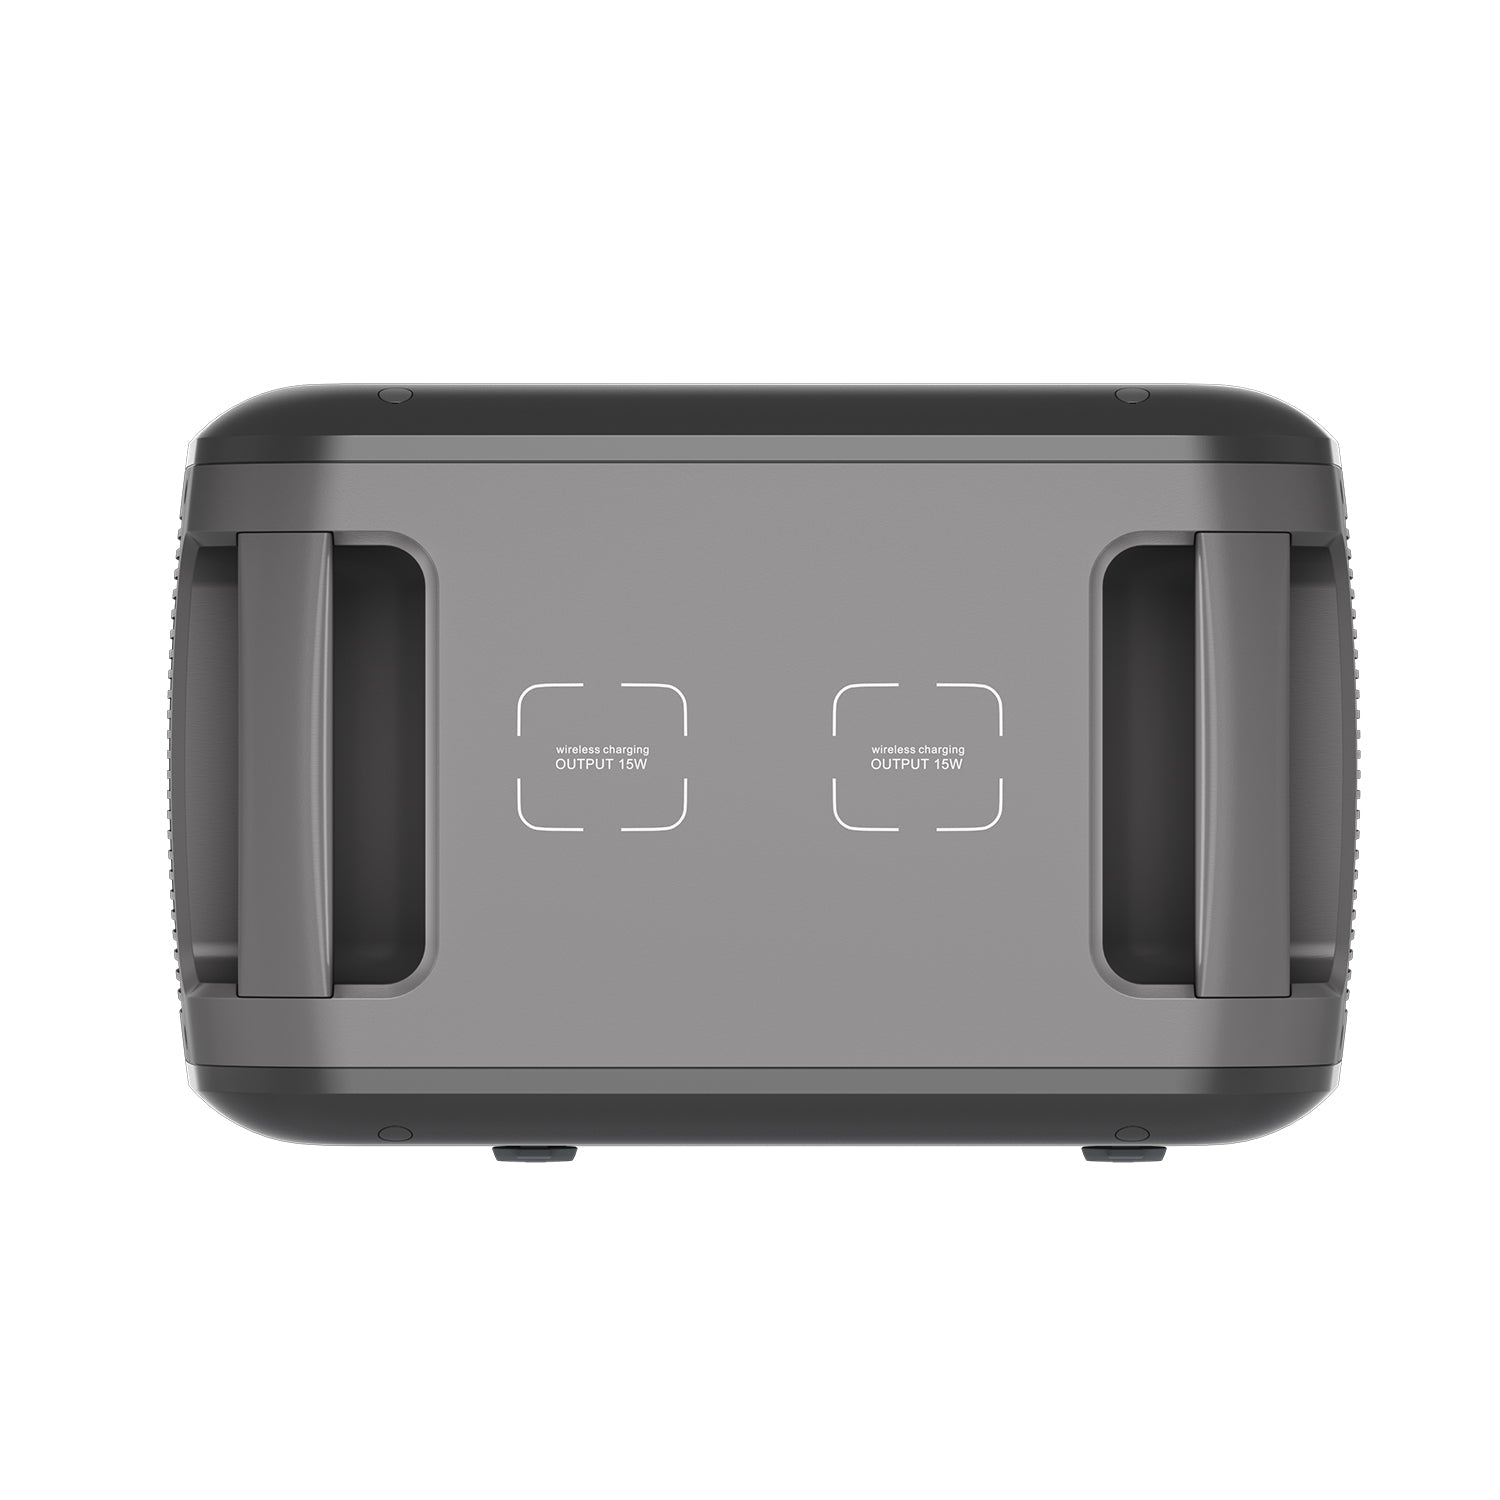 Energizer PPS2000 wireless charge ports